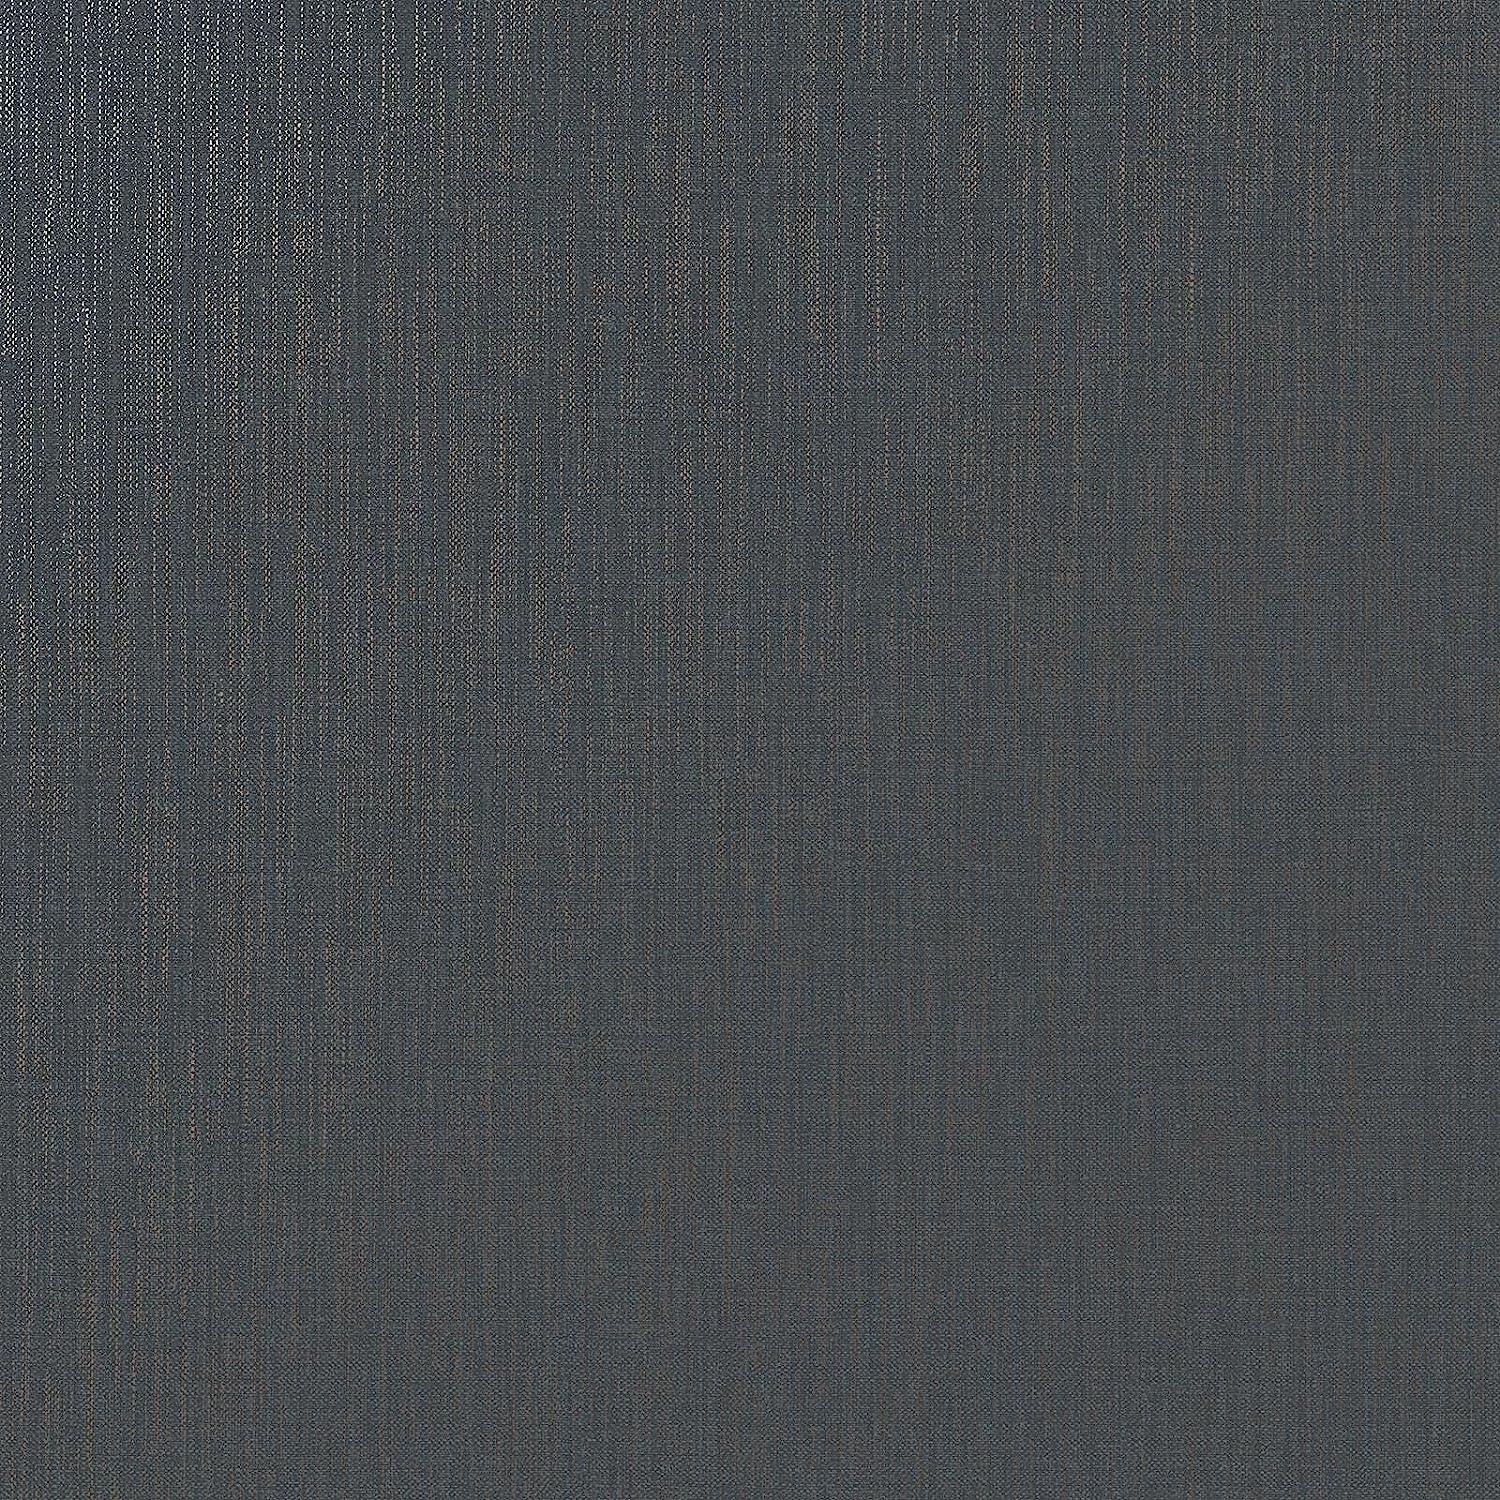 RASCH (U.K) Limited Amara Linen Wallpaper - Modern Wallpaper for Living Room, Bedroom, Fireplace - Decorative Luxury Wall Paper with Realistic Textile Thread Effect & Subtle Gold Glimmer (Navy)